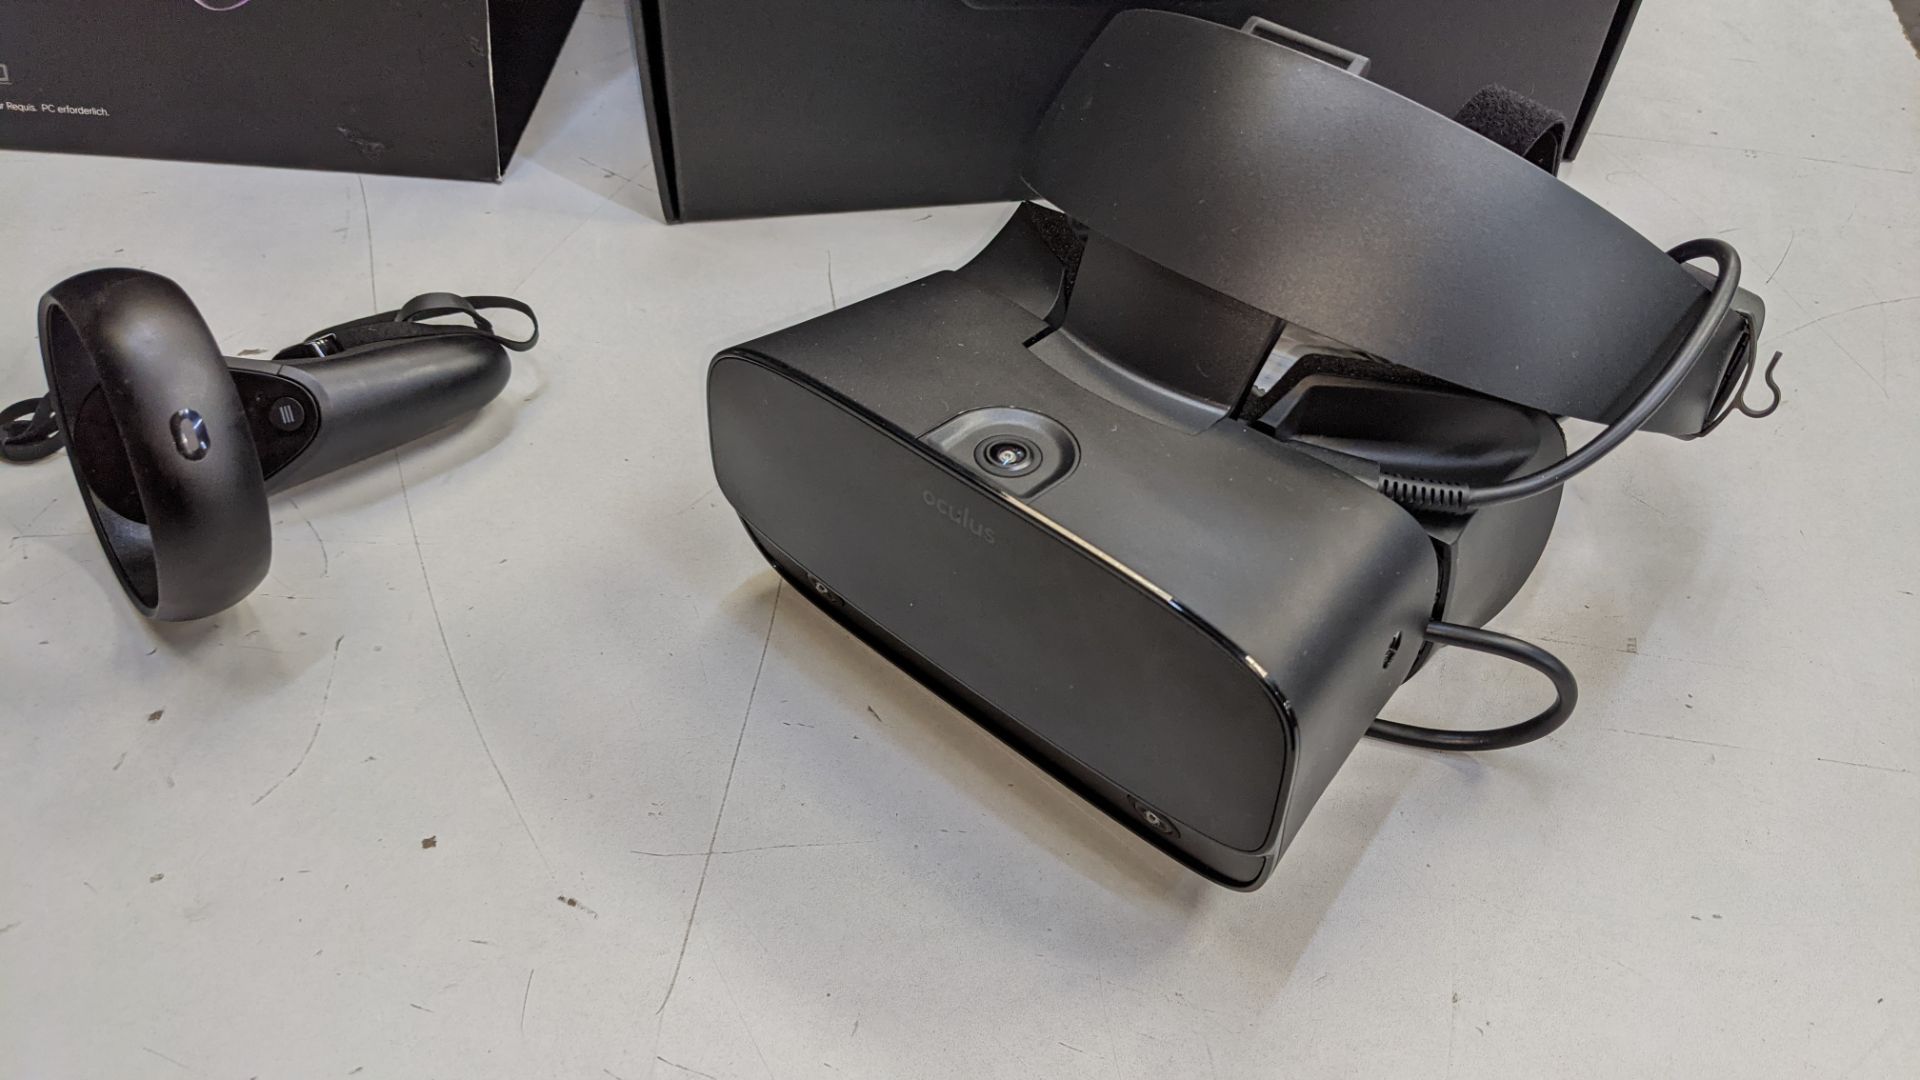 Oculus Rift S virtual reality system comprising headset, controllers, cables, adapters & more - Image 4 of 14